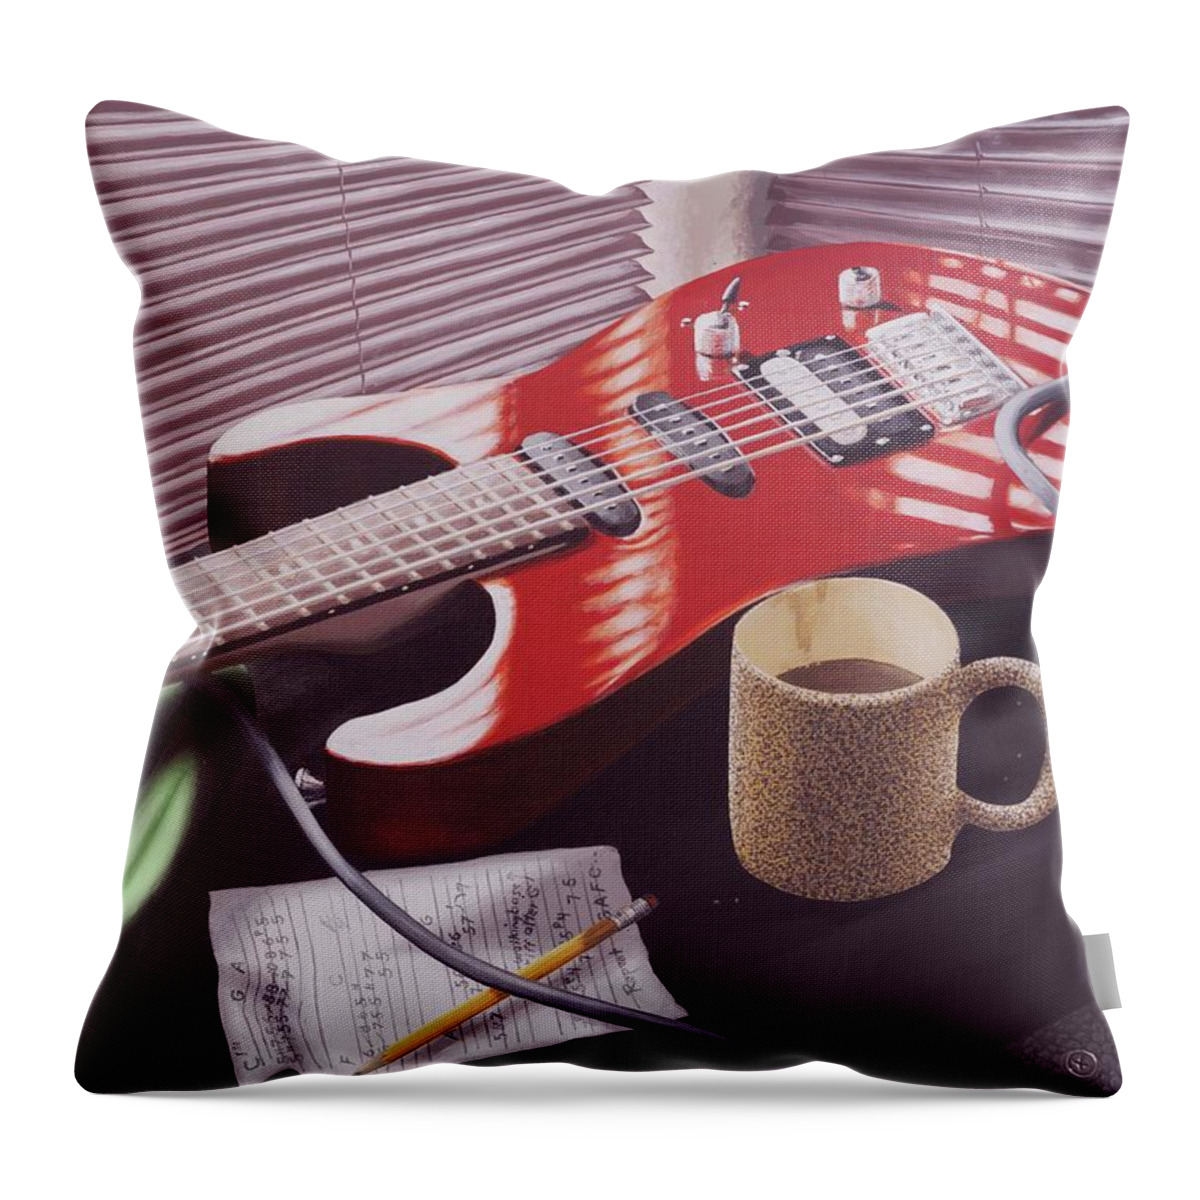 Still Life Throw Pillow featuring the painting Take Ten by Jon Carroll Otterson